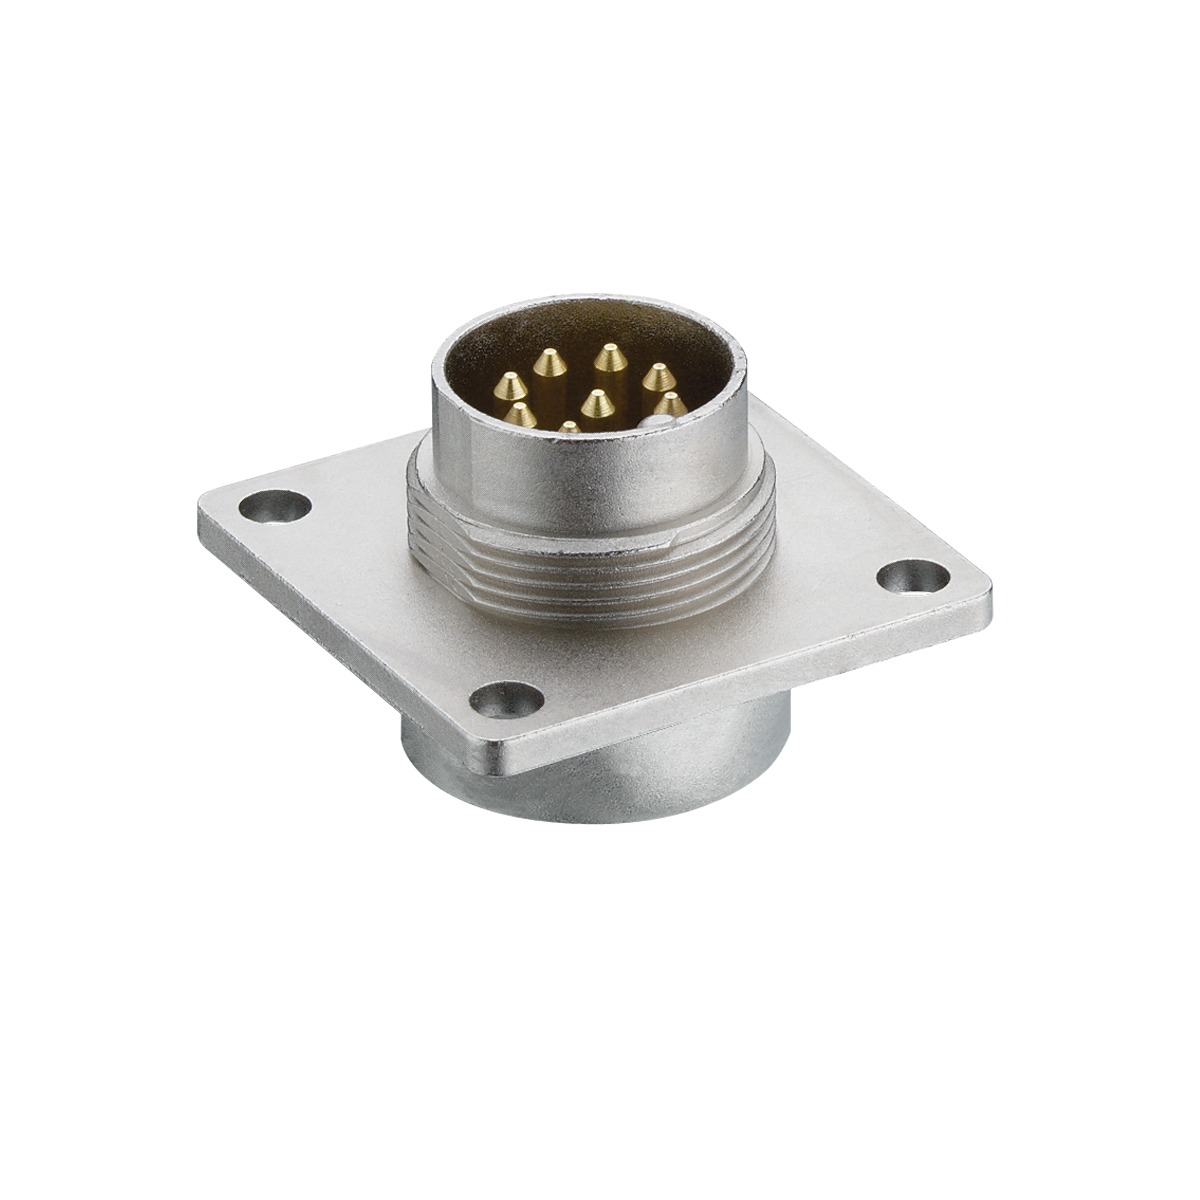 Lumberg: 0318-1 (Series 03 | Circular connectors with threaded joint M16 acc. to IEC 61076-2-106, IP40/IP68)